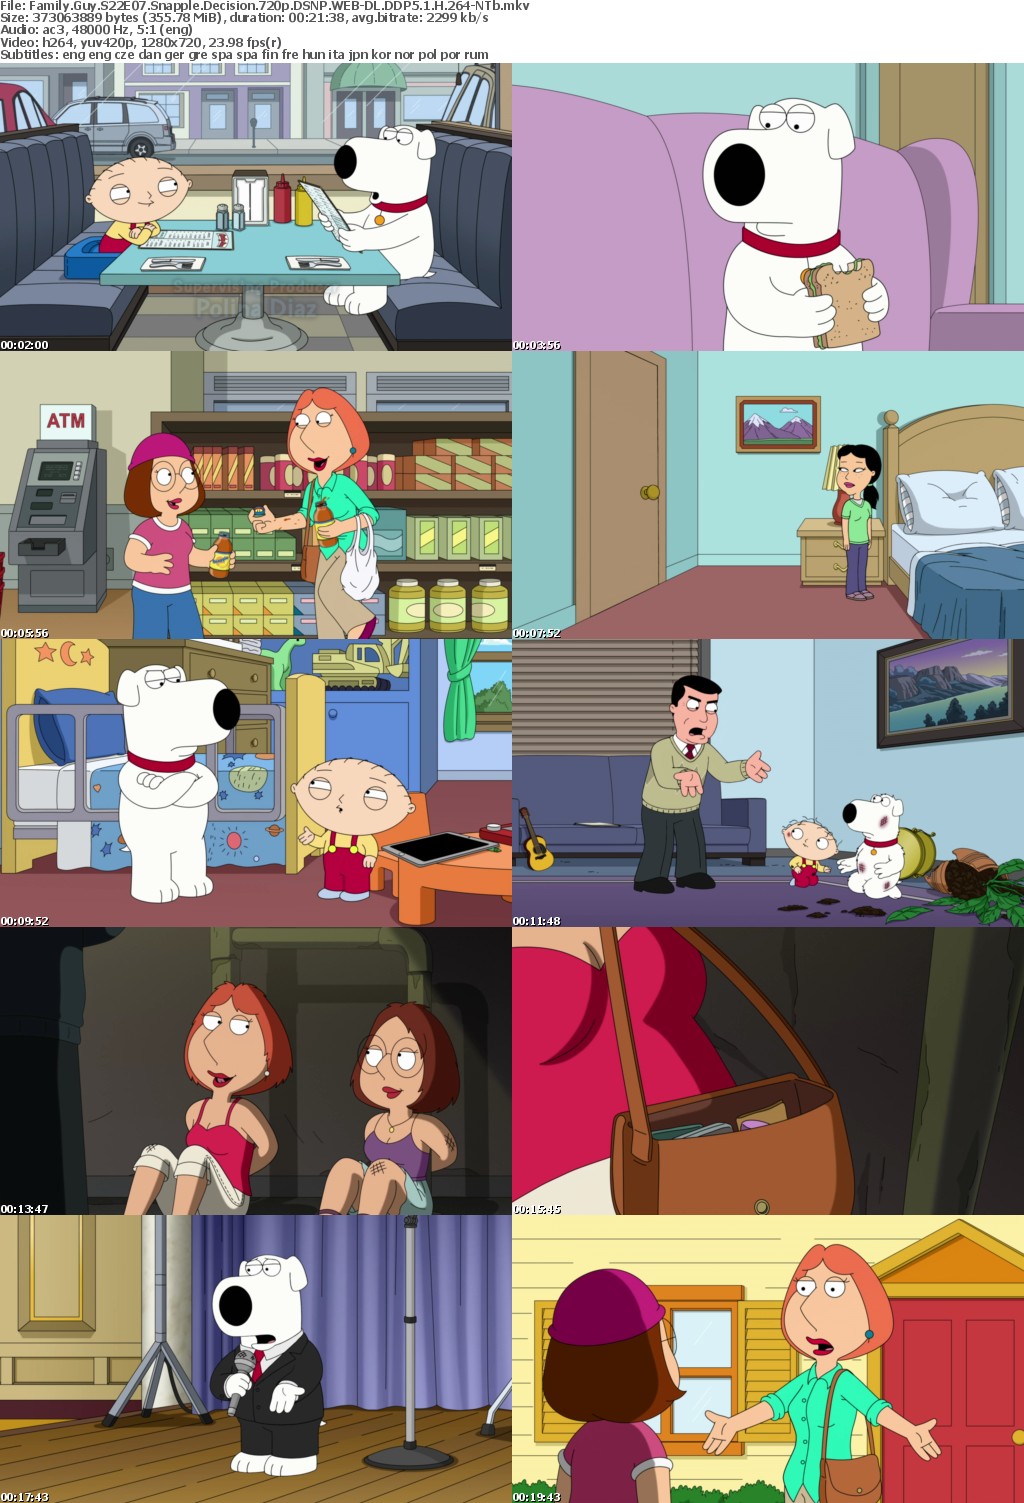 Family Guy S22E07 Snapple Decision 720p DSNP WEB-DL DDP5 1 H 264-NTb